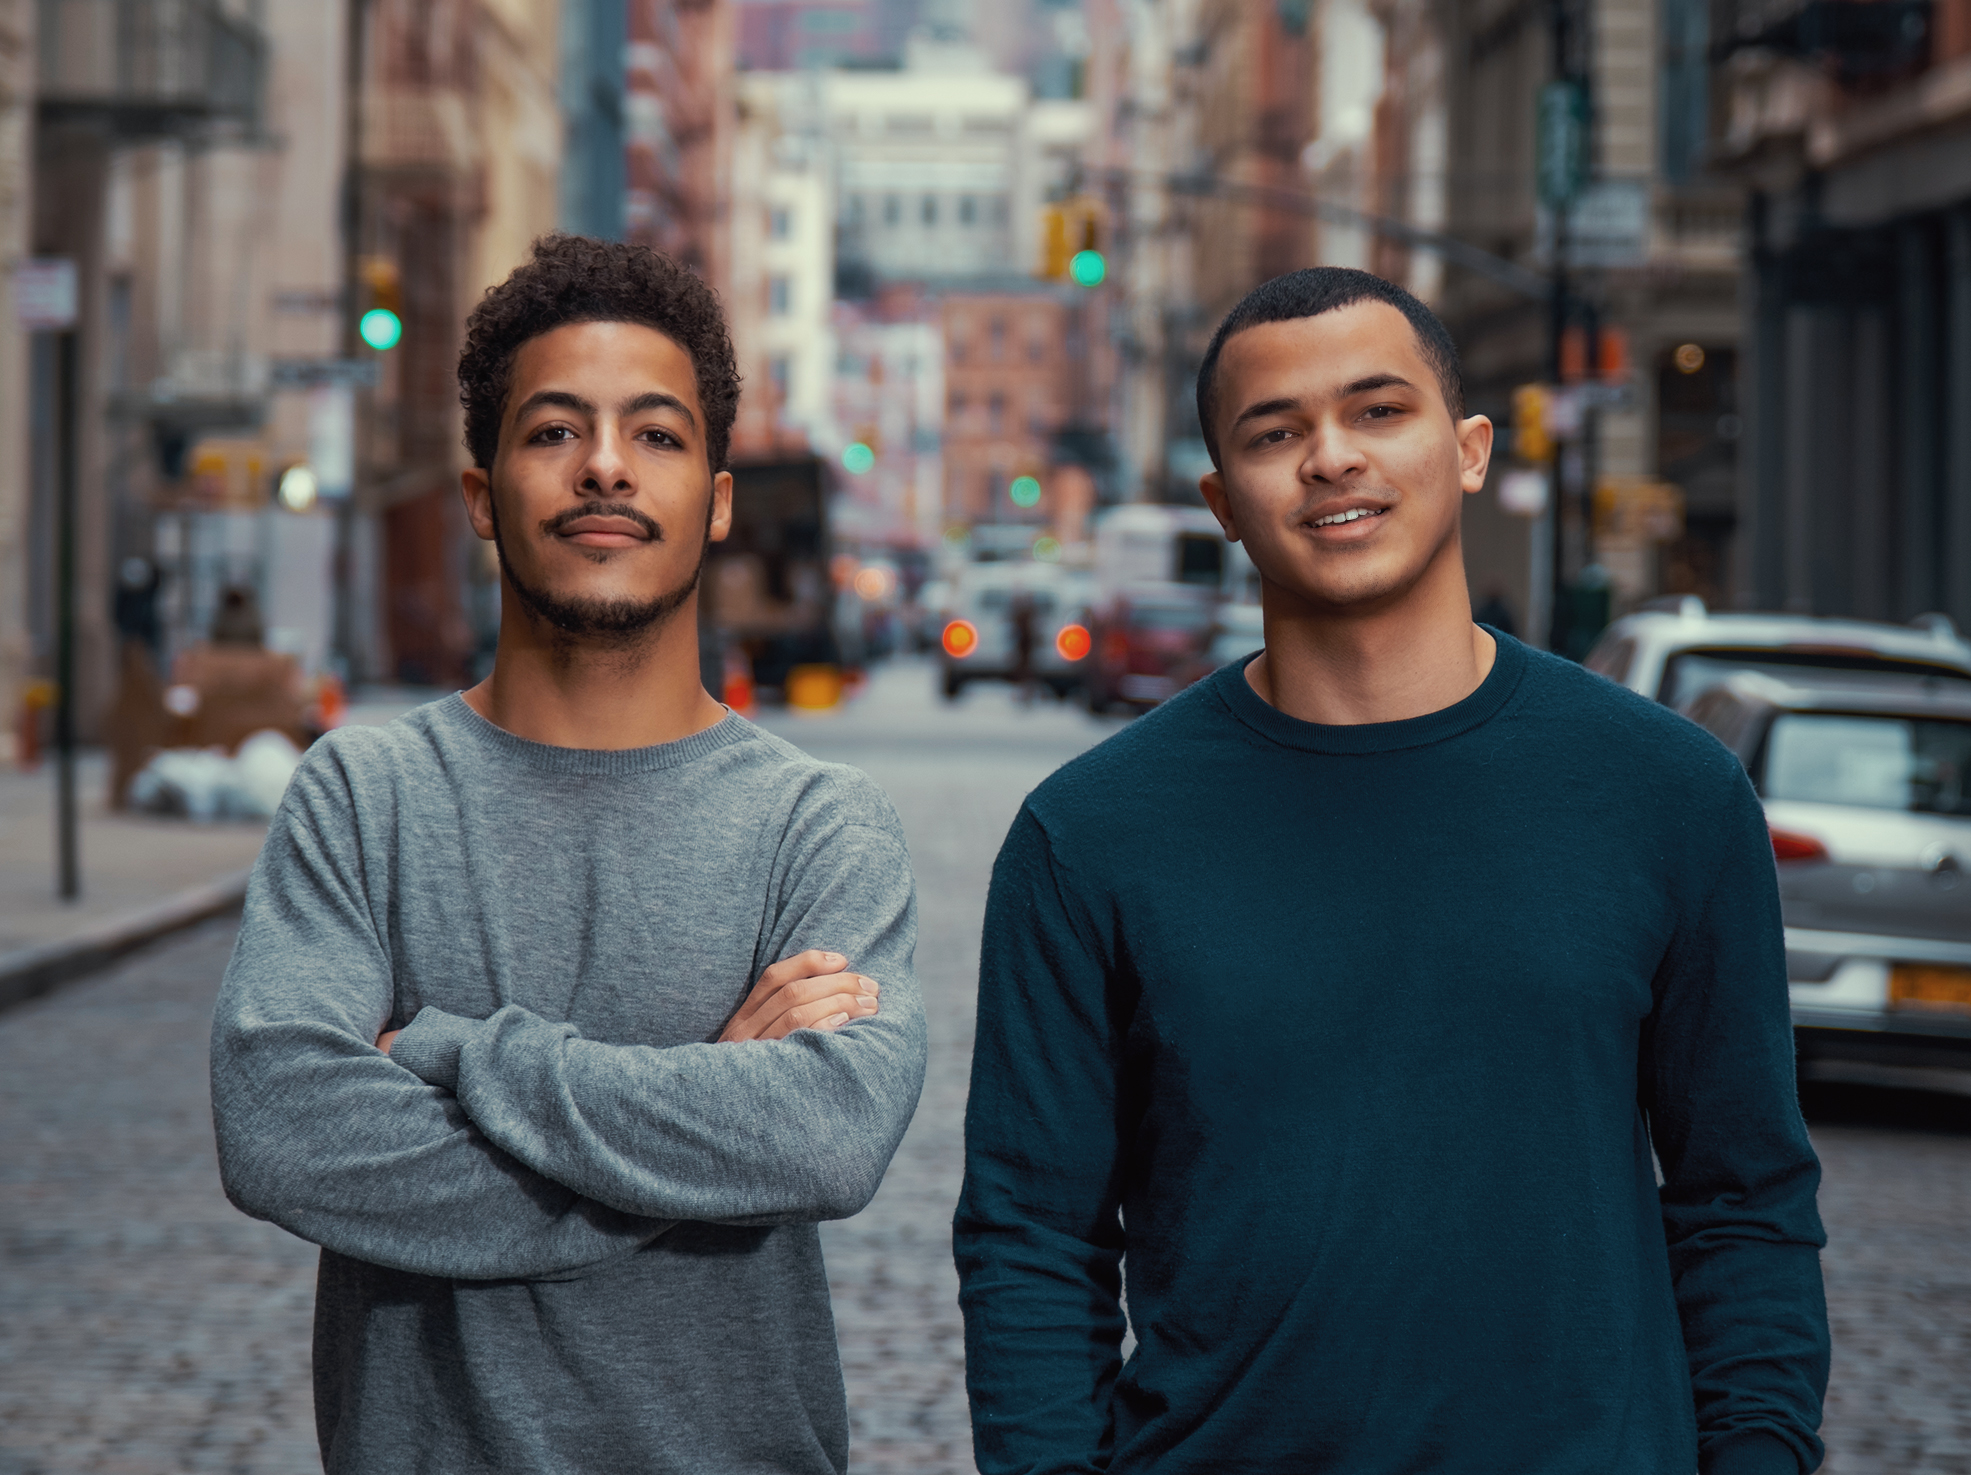 These 21-Years-Olds Are Going After Eventbrite and Ticketmaster With Their Own Event Platform—And It's Already Raised $5M So Far